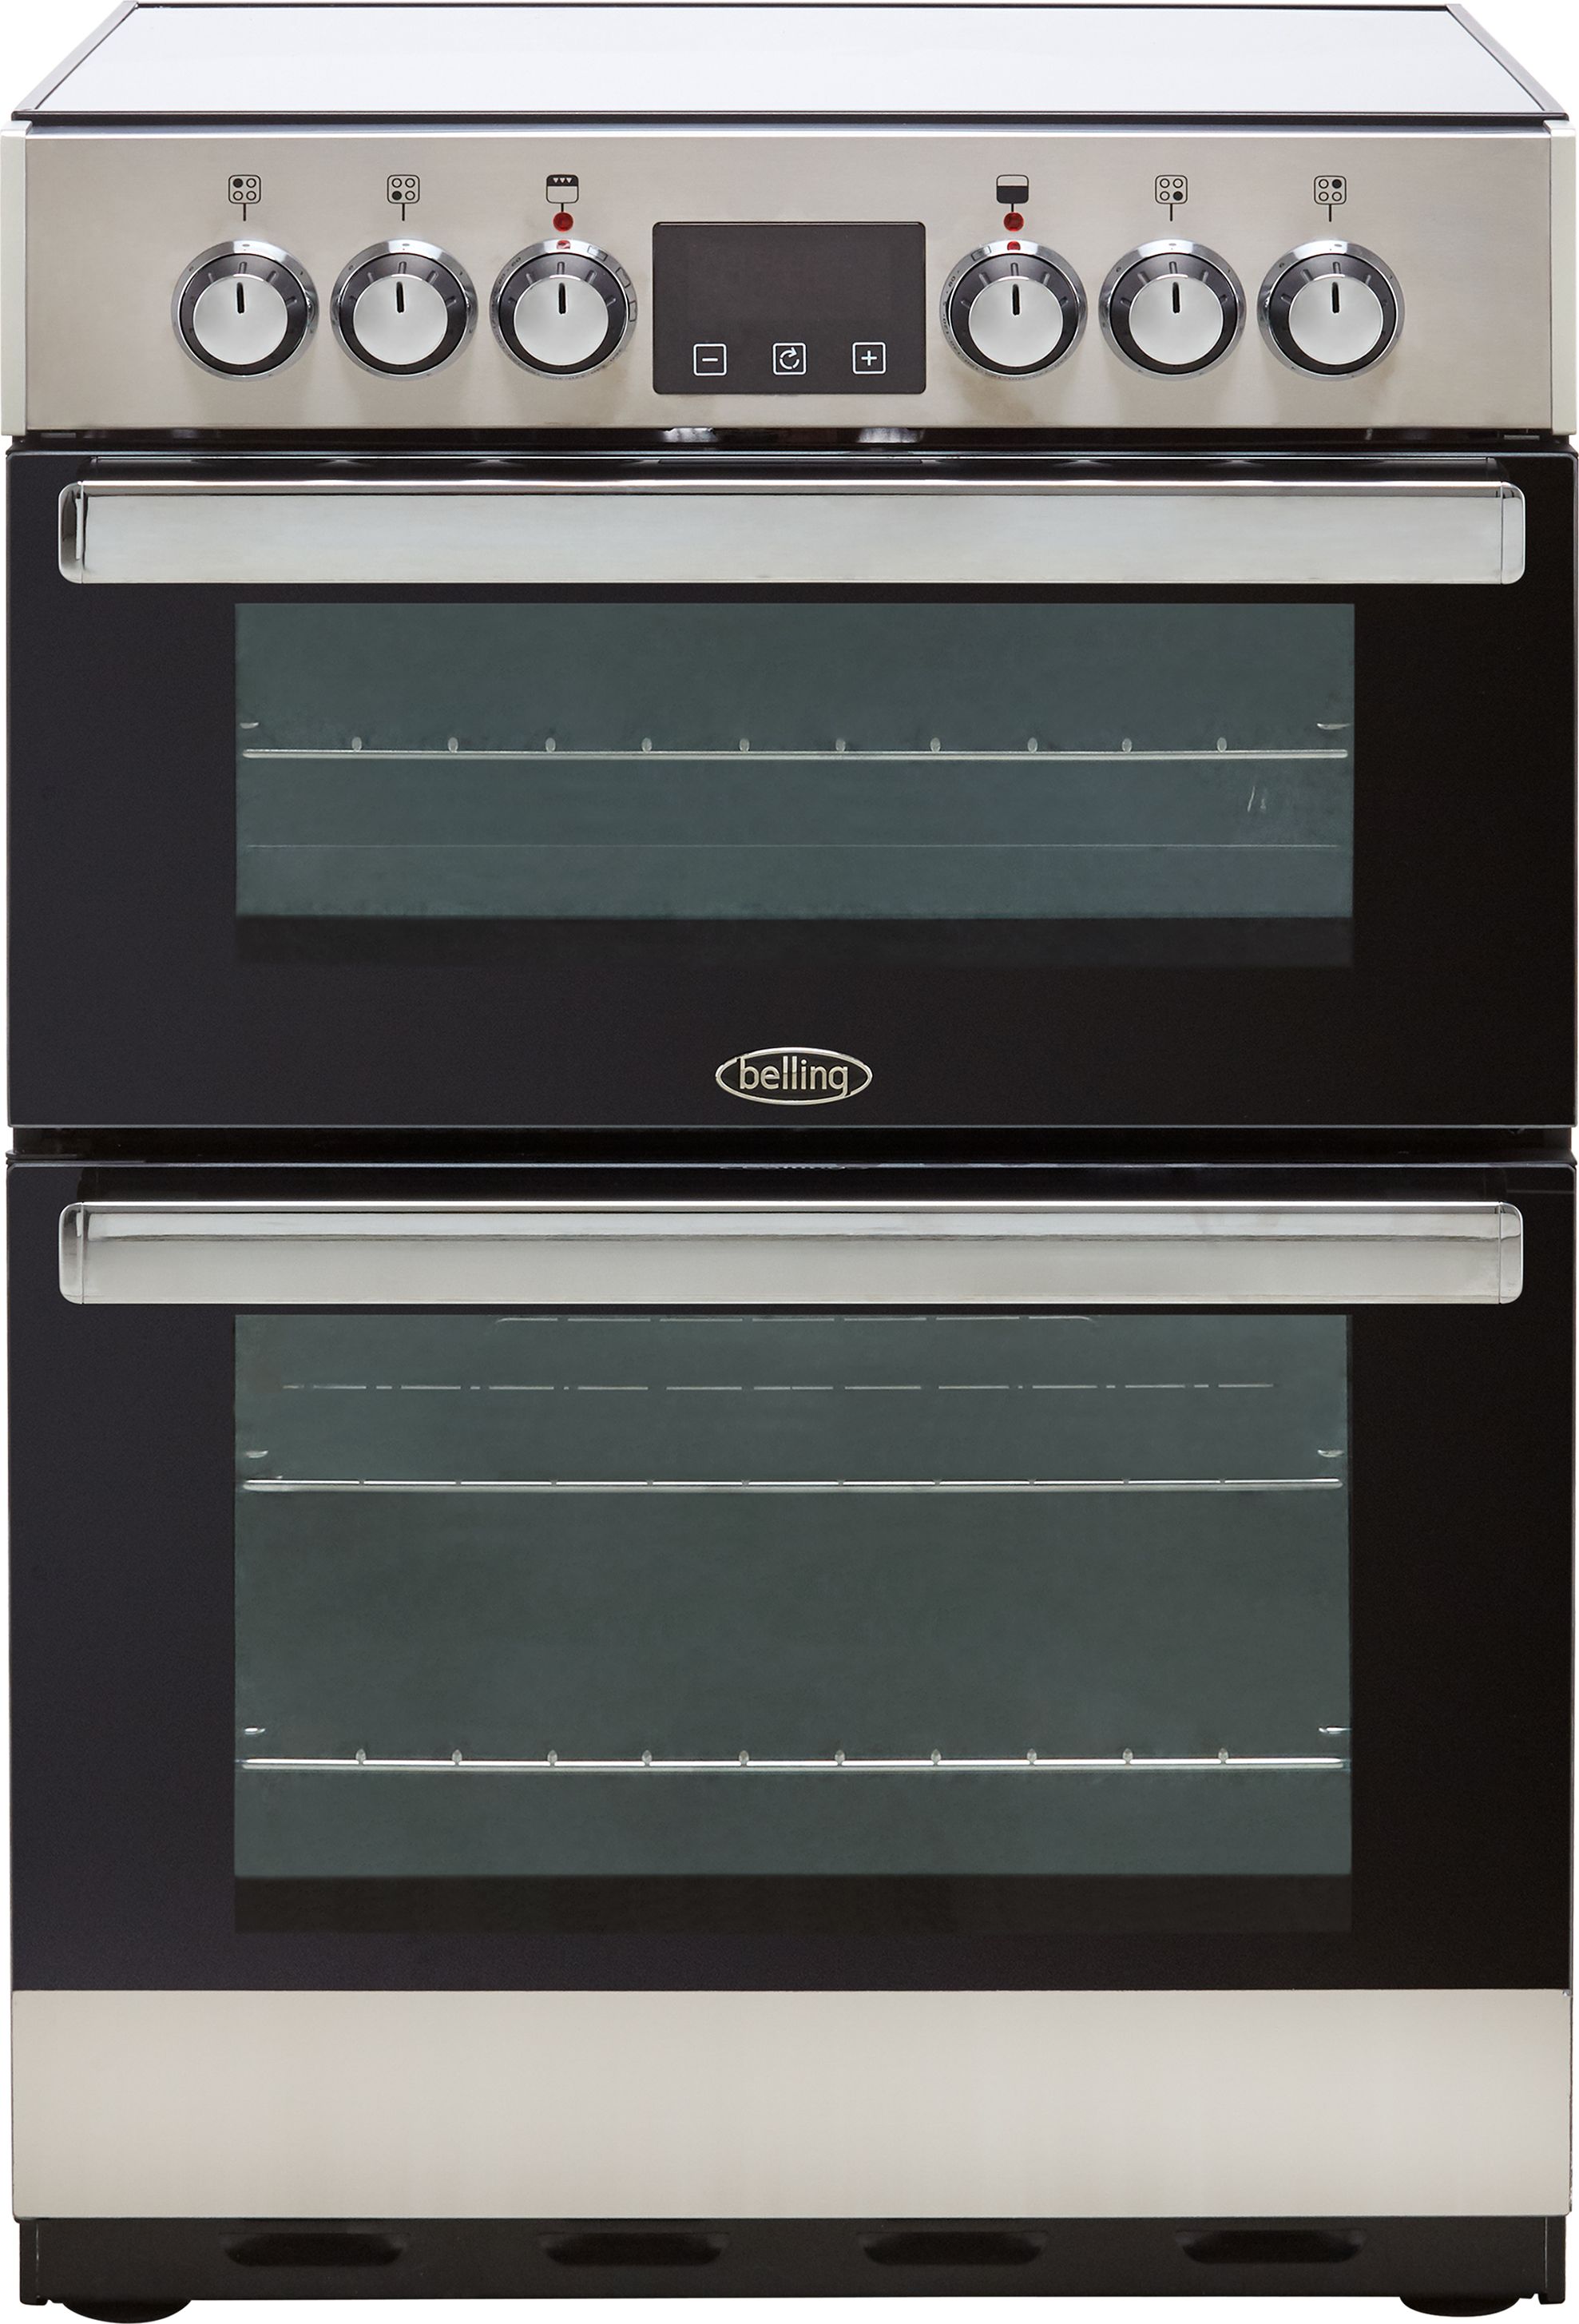 Belling Cookcentre 60E 60cm Electric Cooker with Ceramic Hob - Stainless Steel - A/A Rated, Stainless Steel